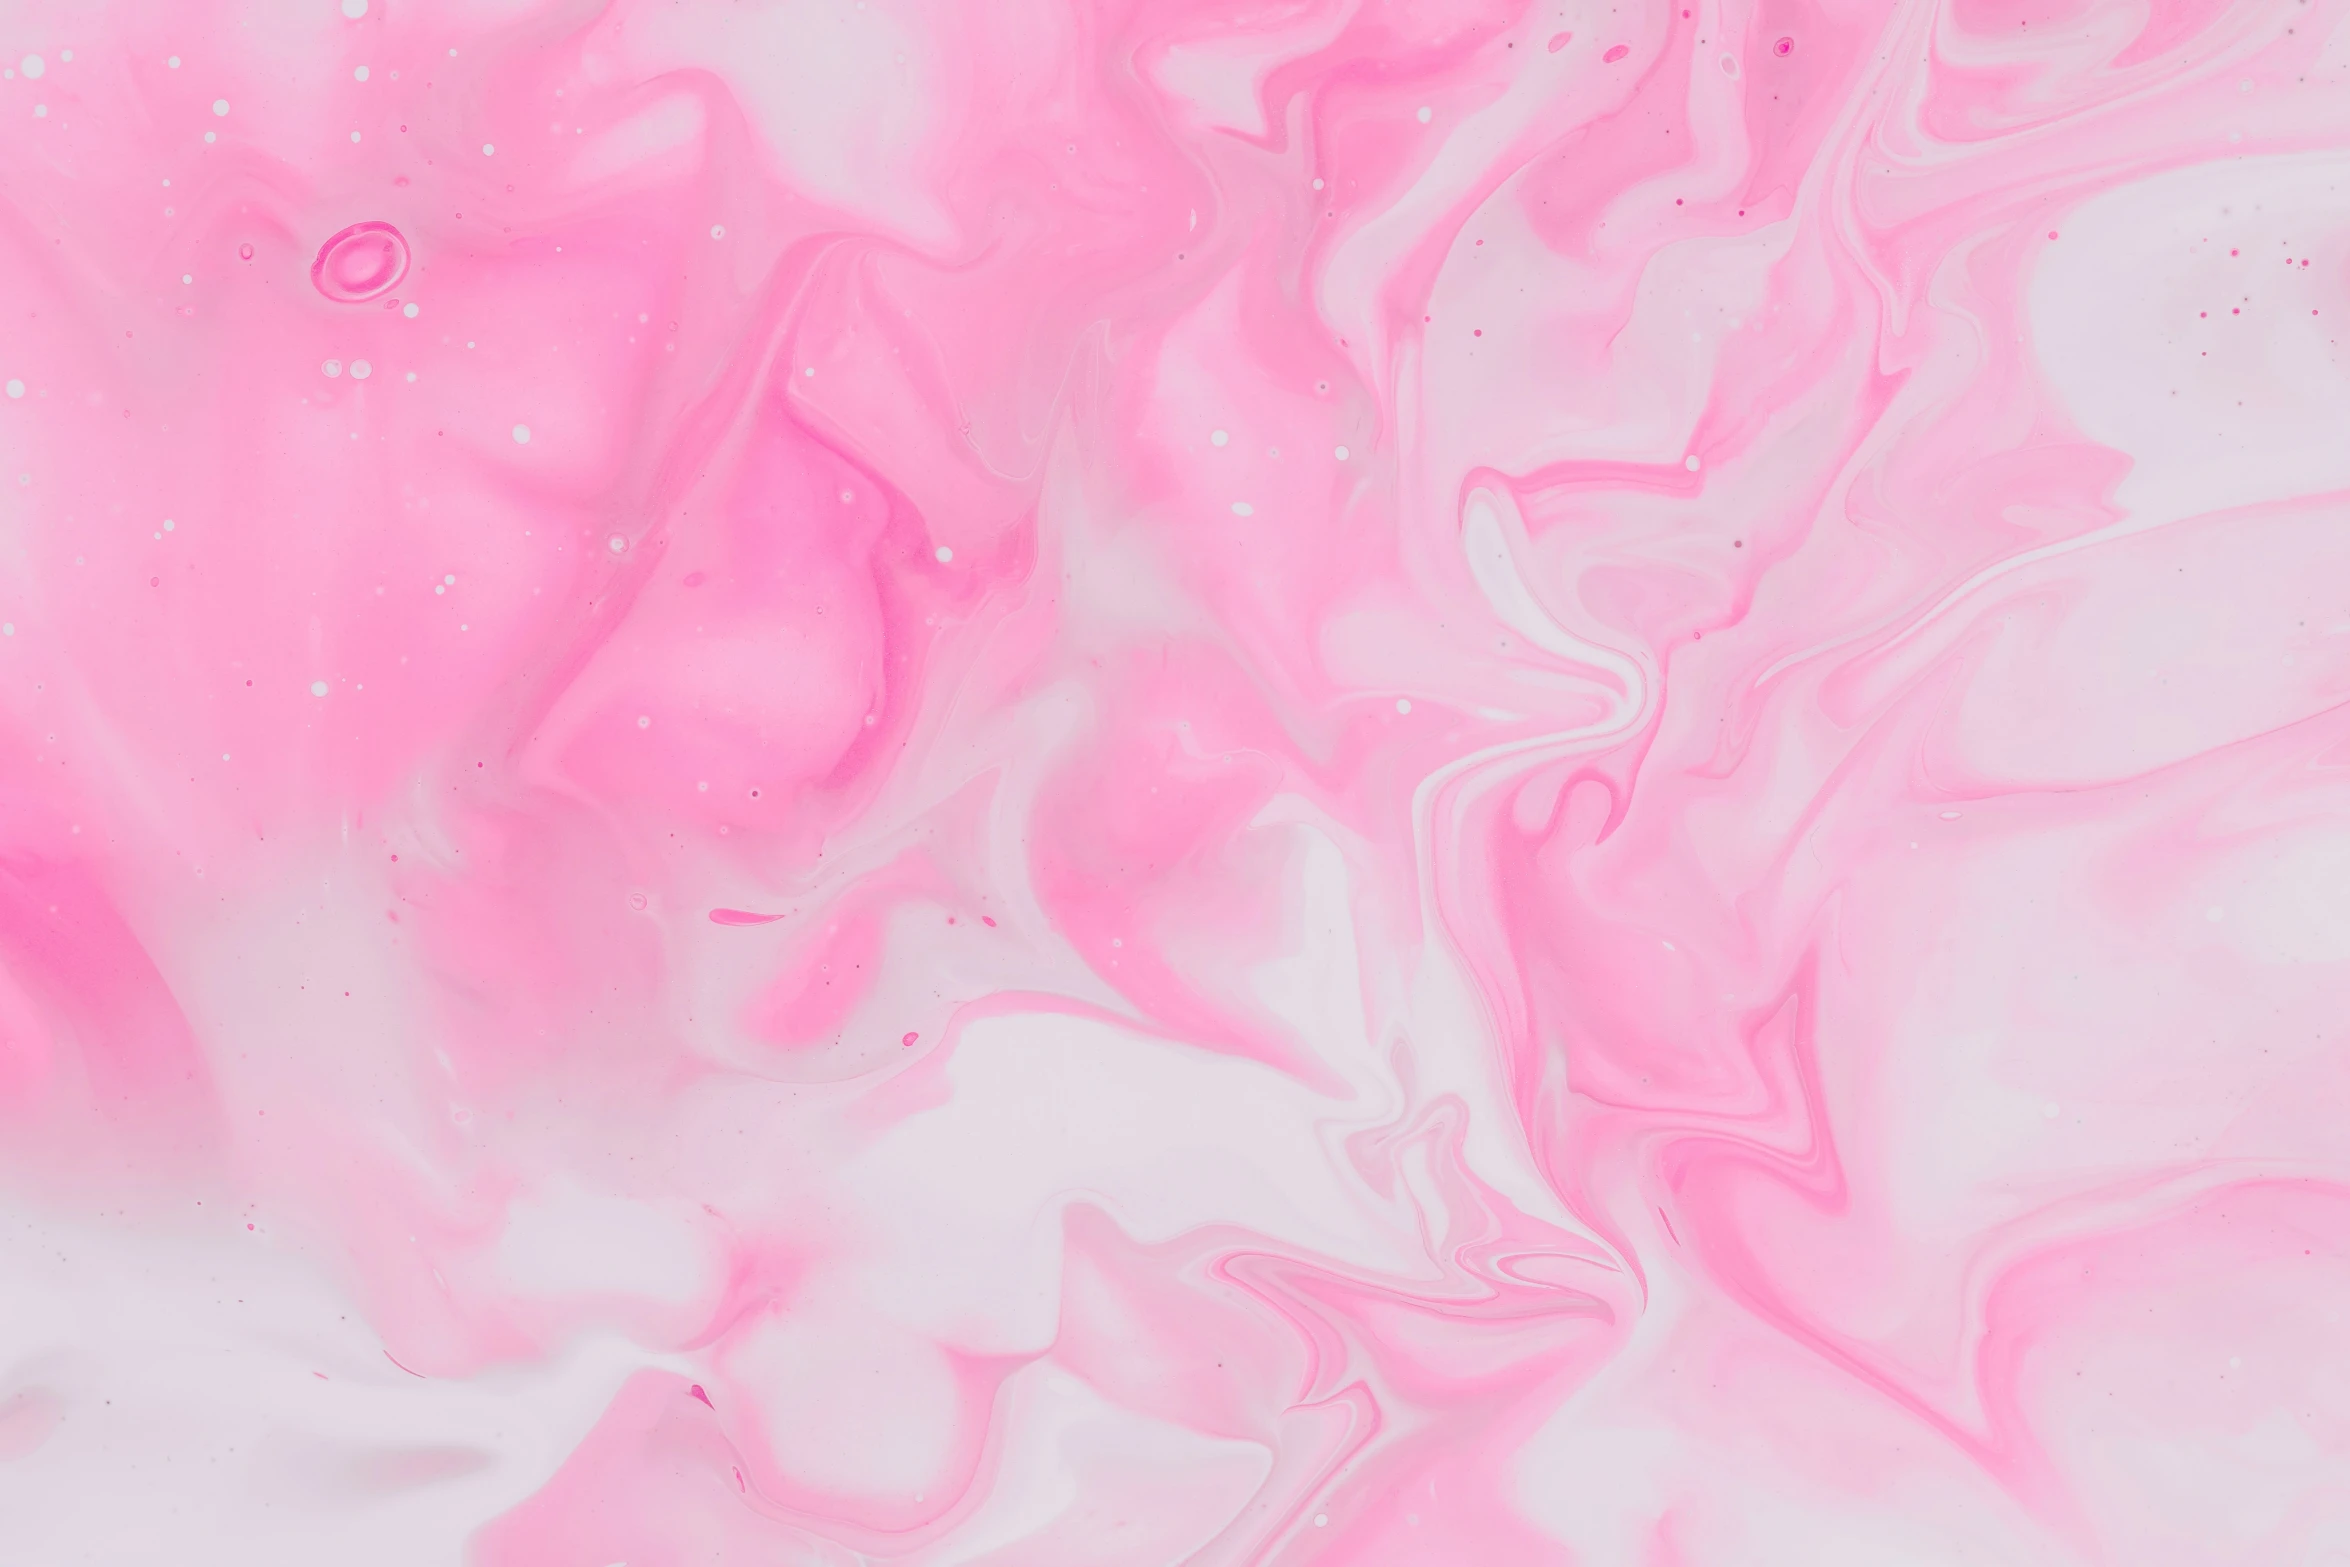 a white and pink textured liquid or substance